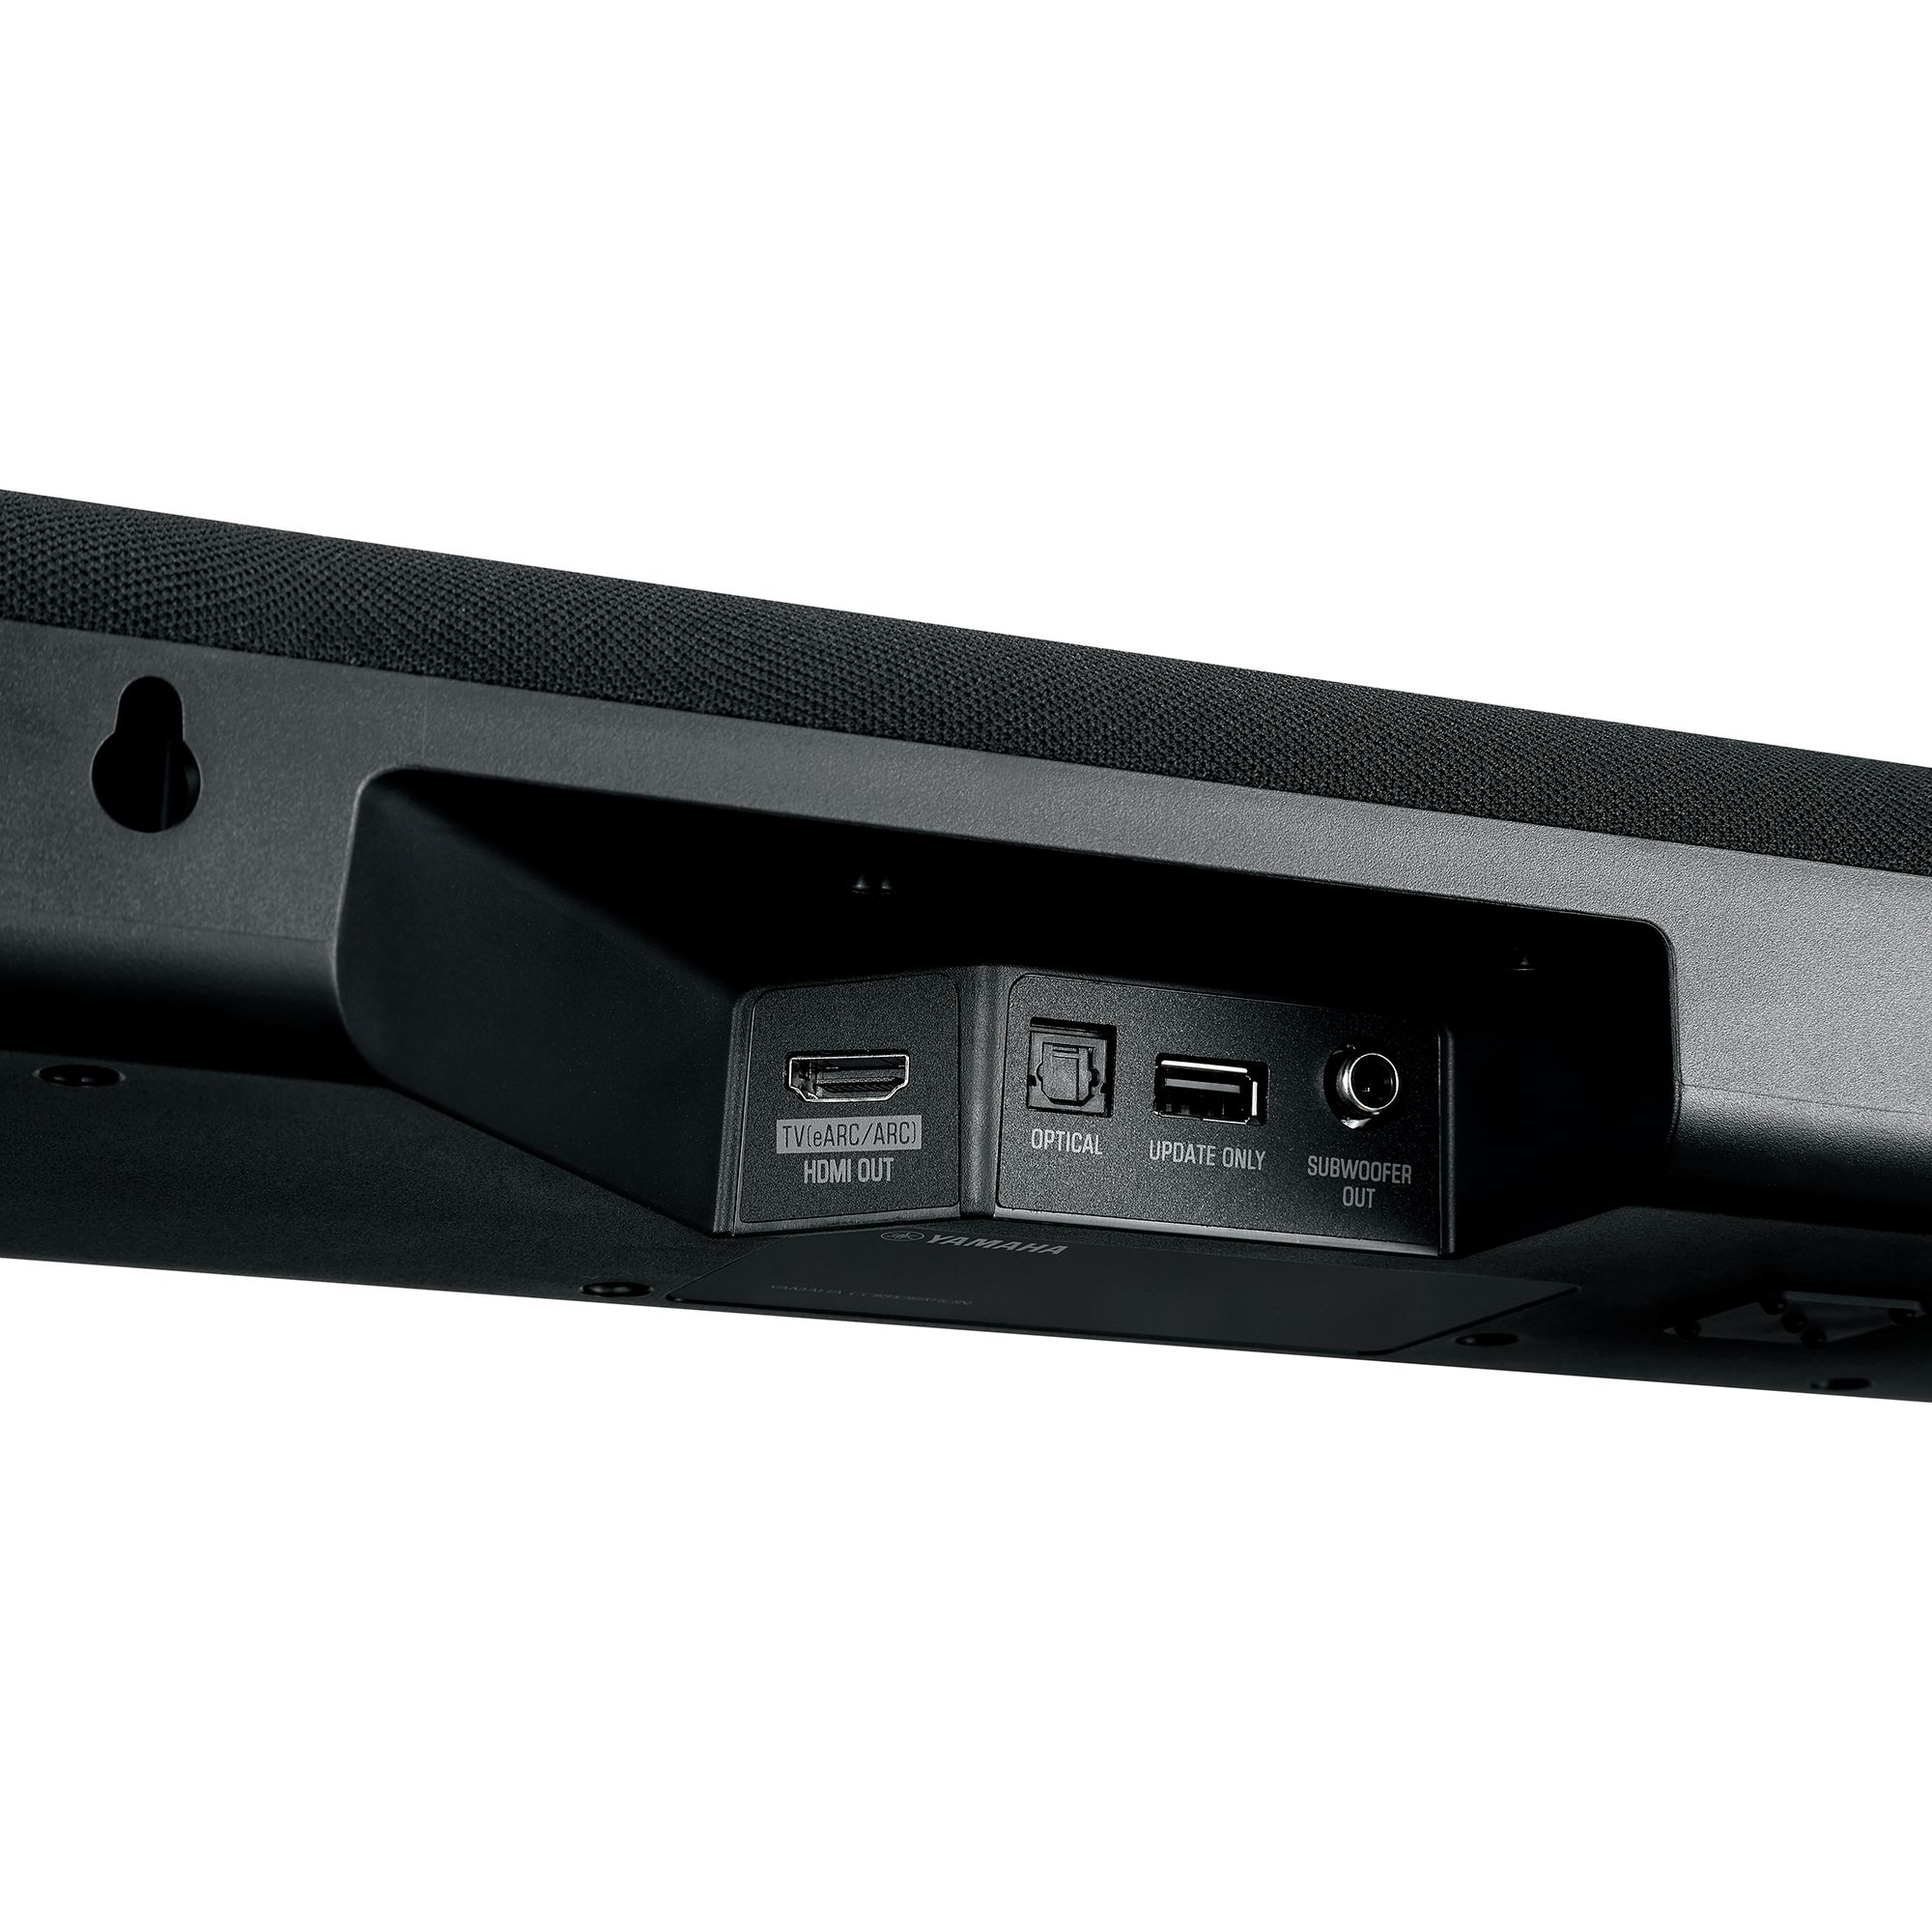 SR-B30A - Overview - Sound Bars - Audio & Visual - Products